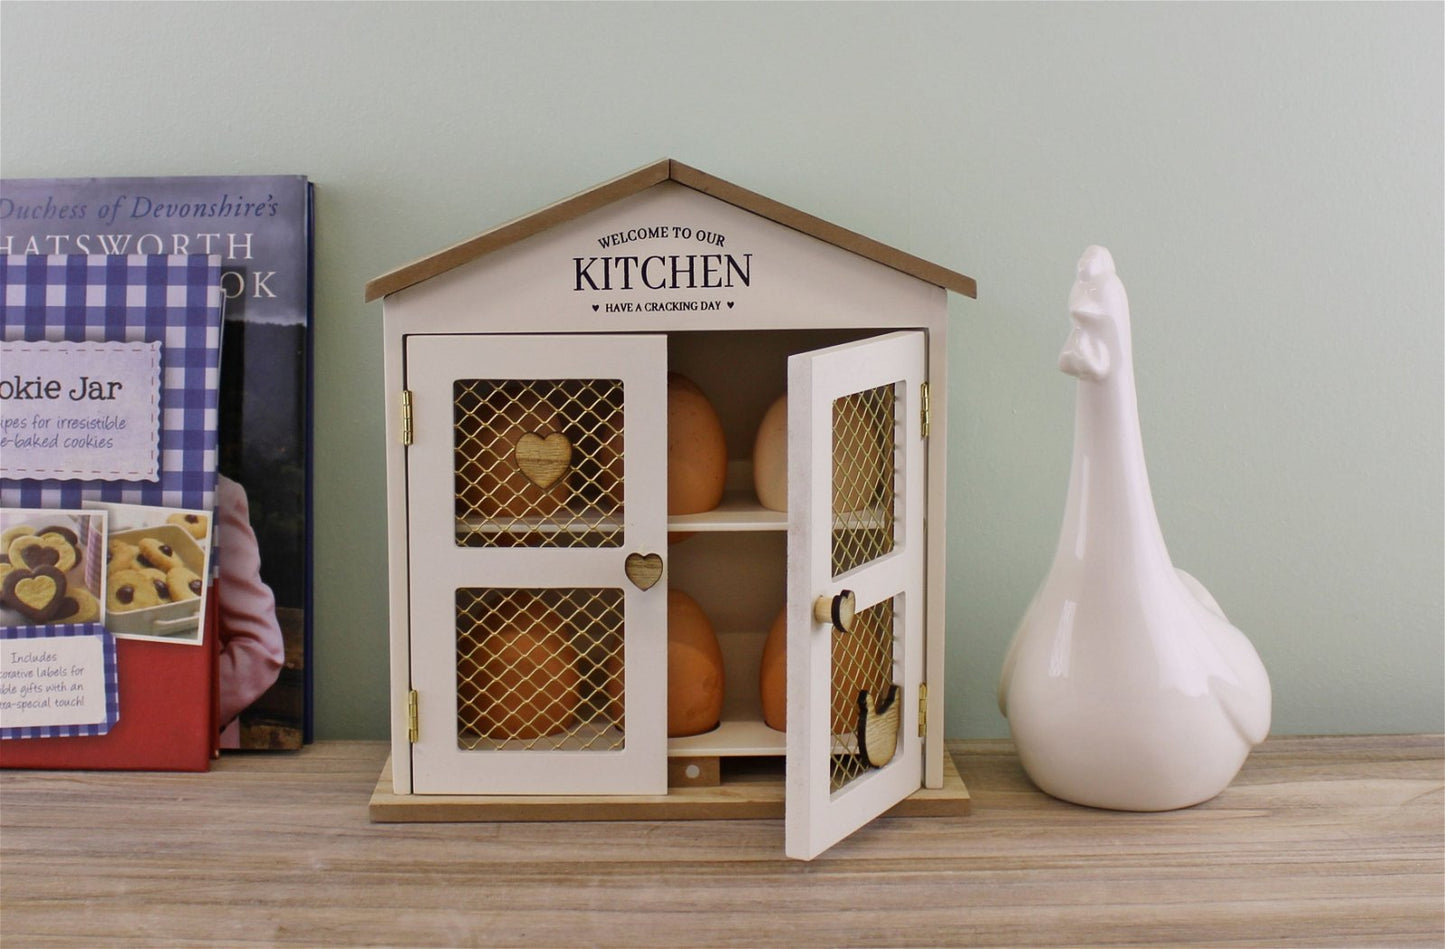 Welcome To Our Kitchen Egg House, Storage